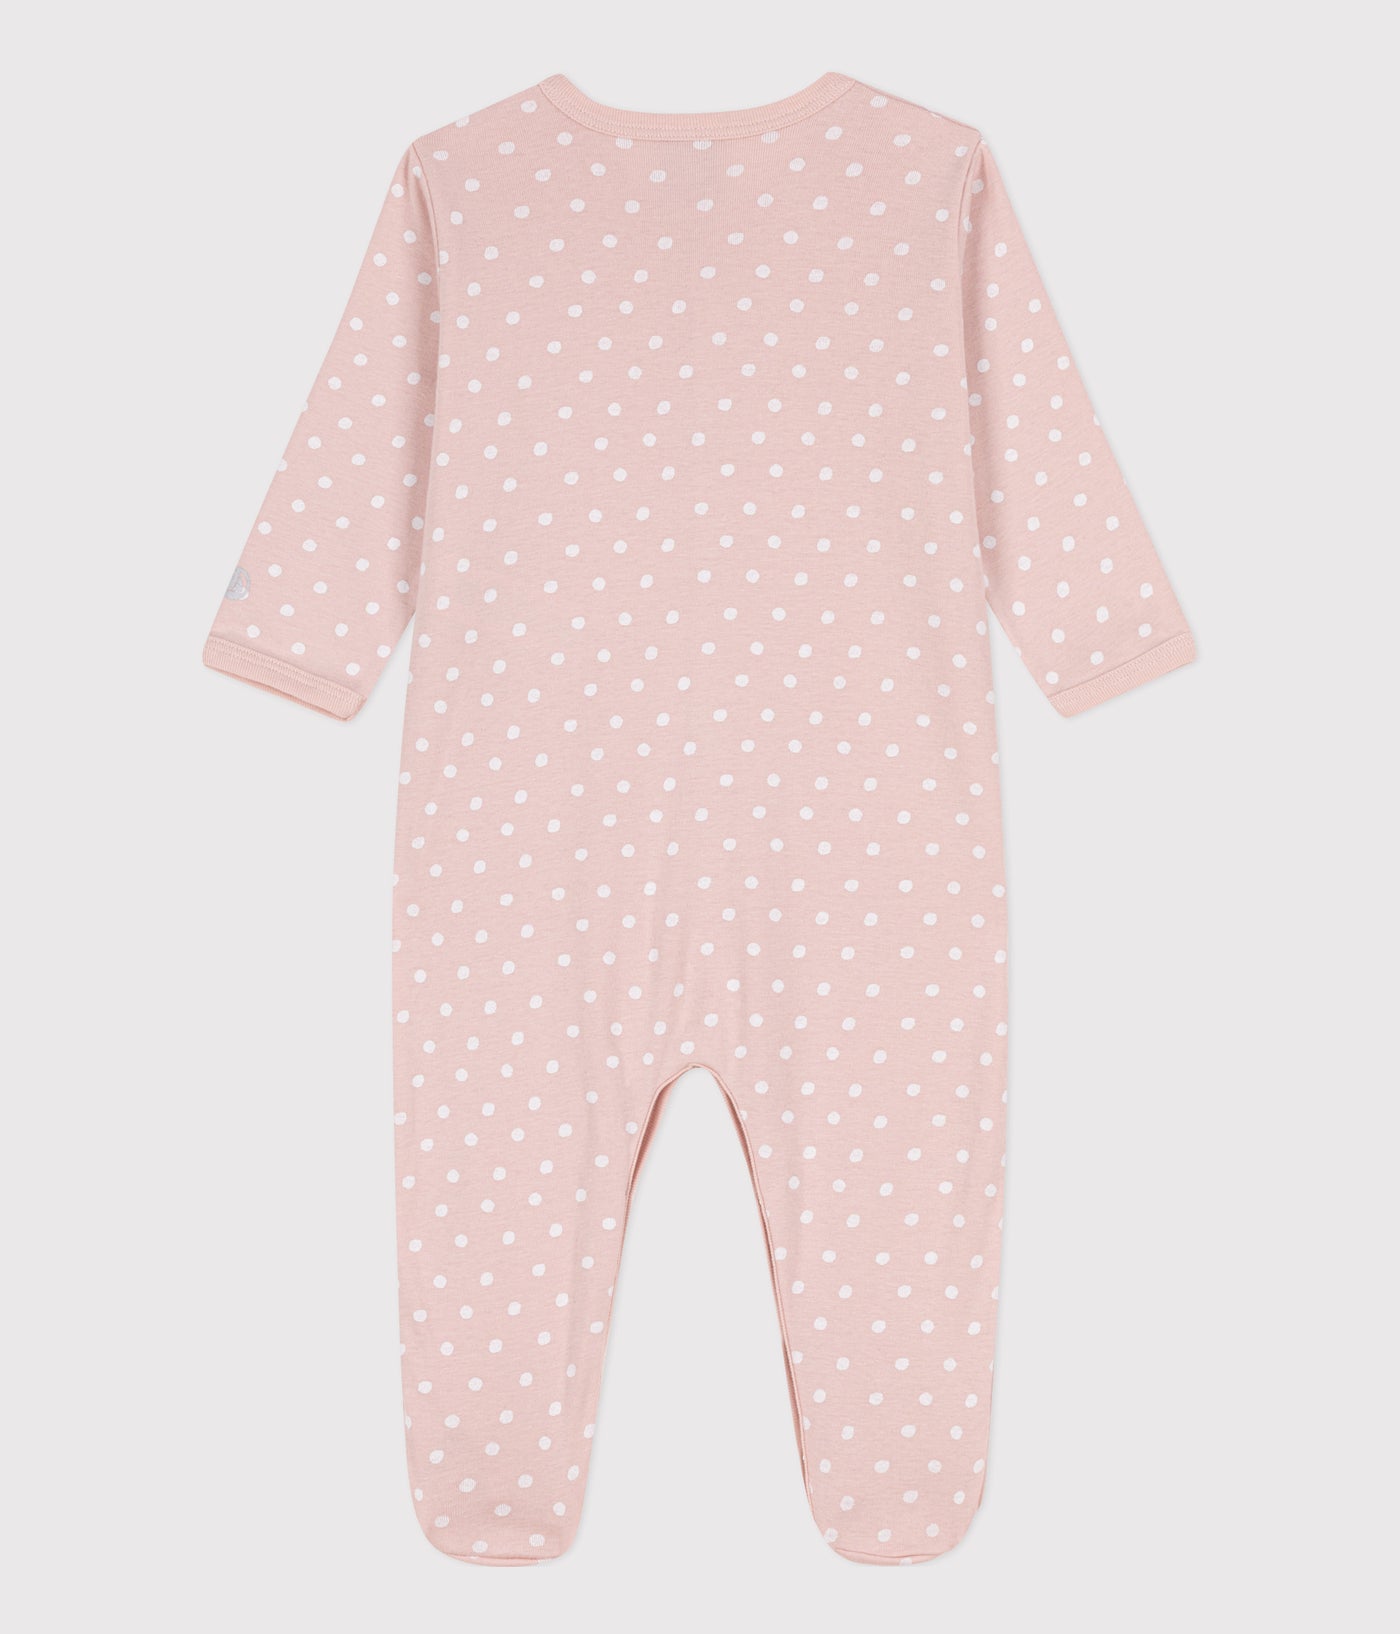 SPOTTED COTTON SLEEPSUIT